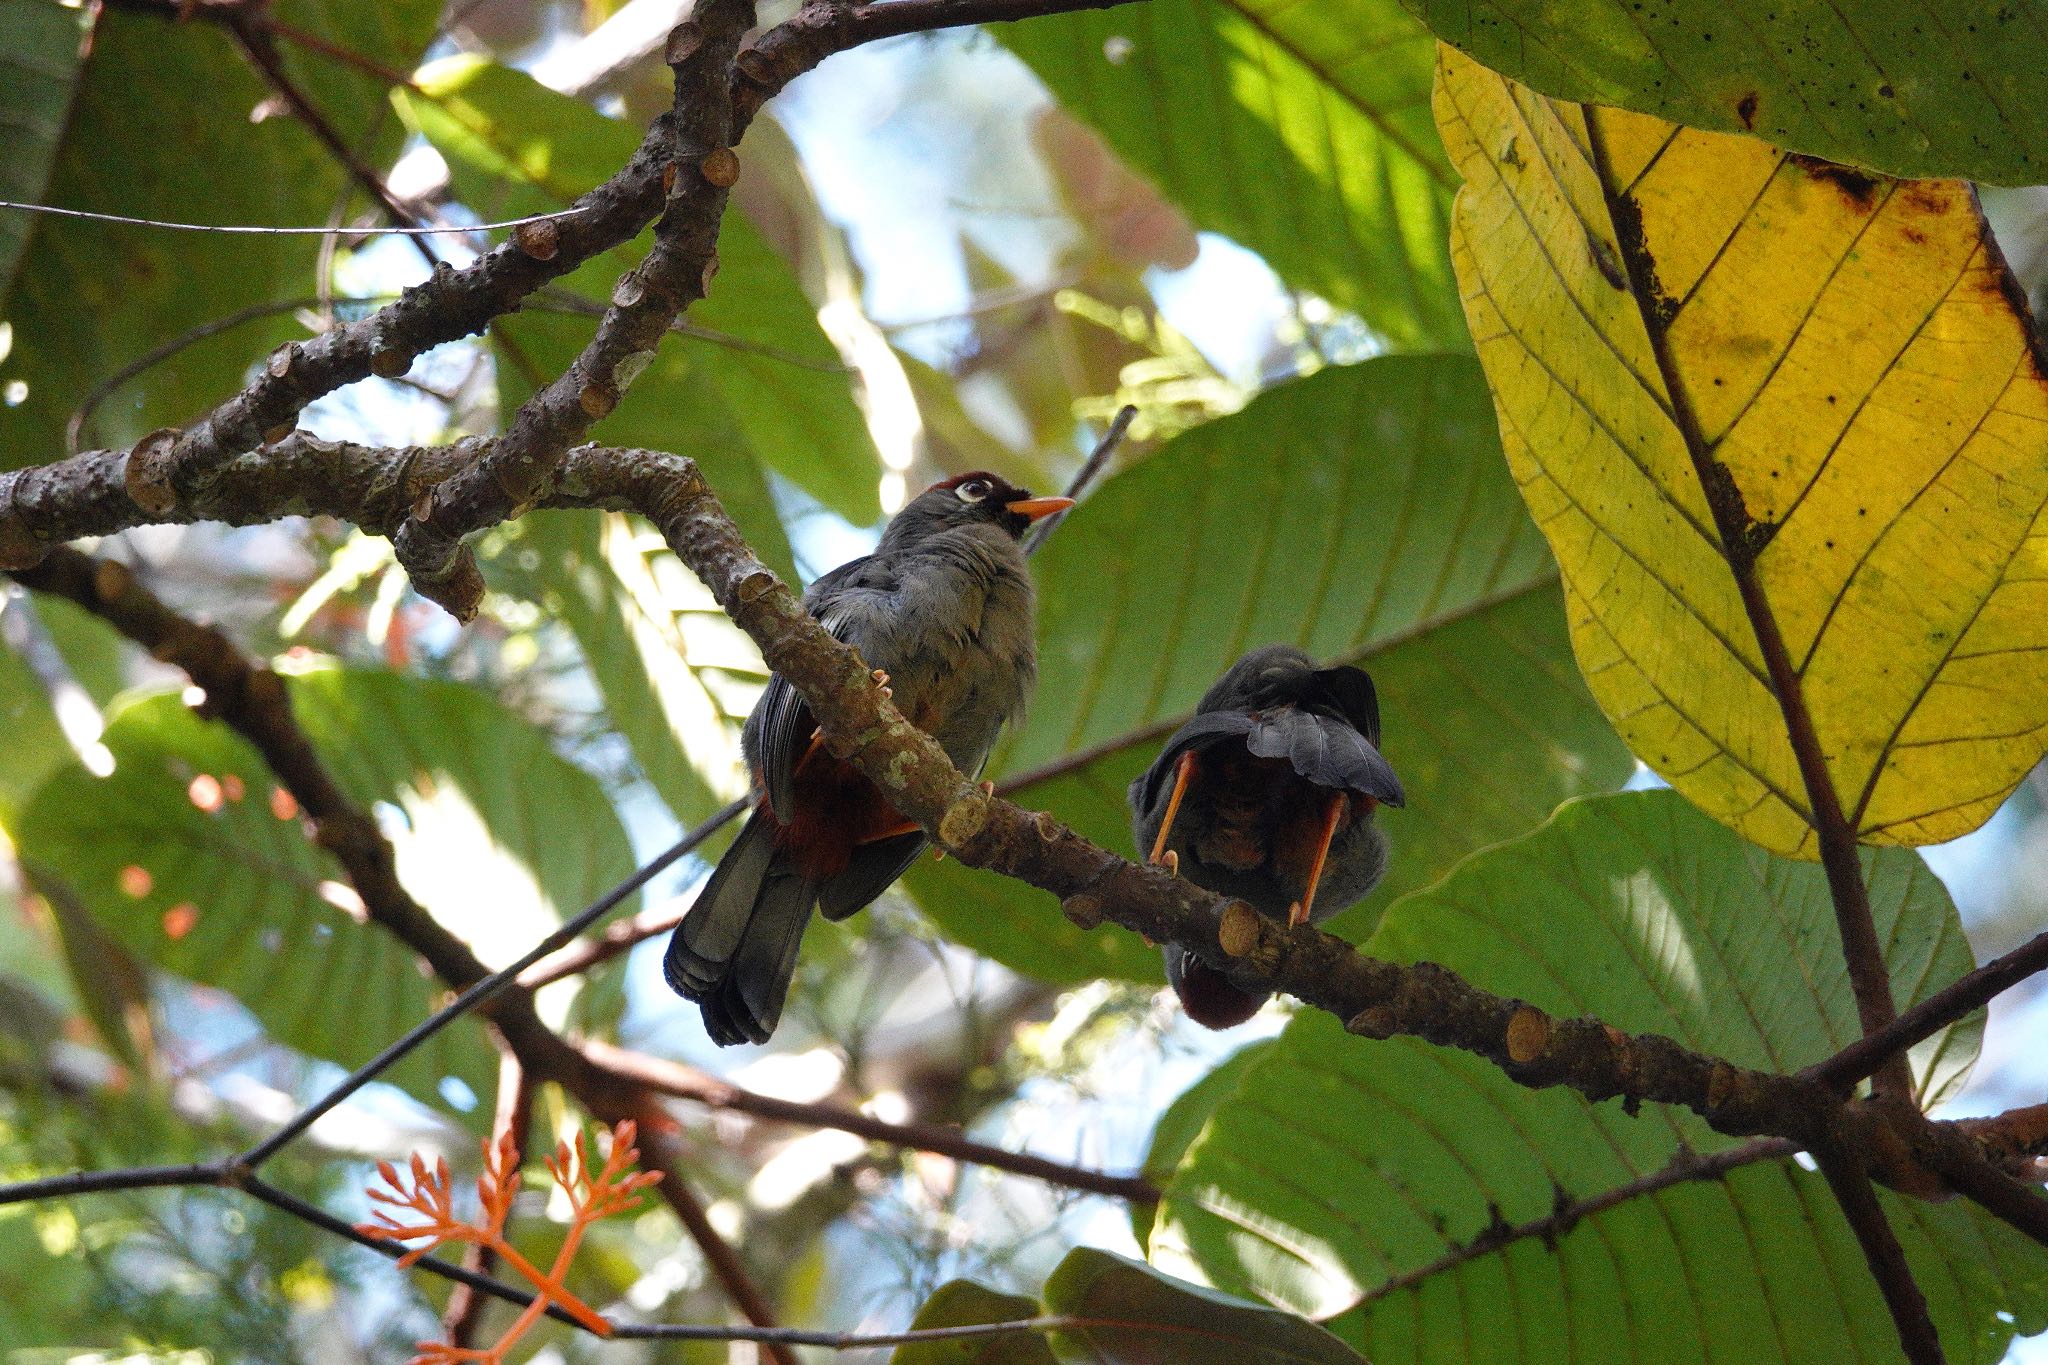 Photo of Chestnut-capped Laughingthrush at Fraser's Hill by のどか